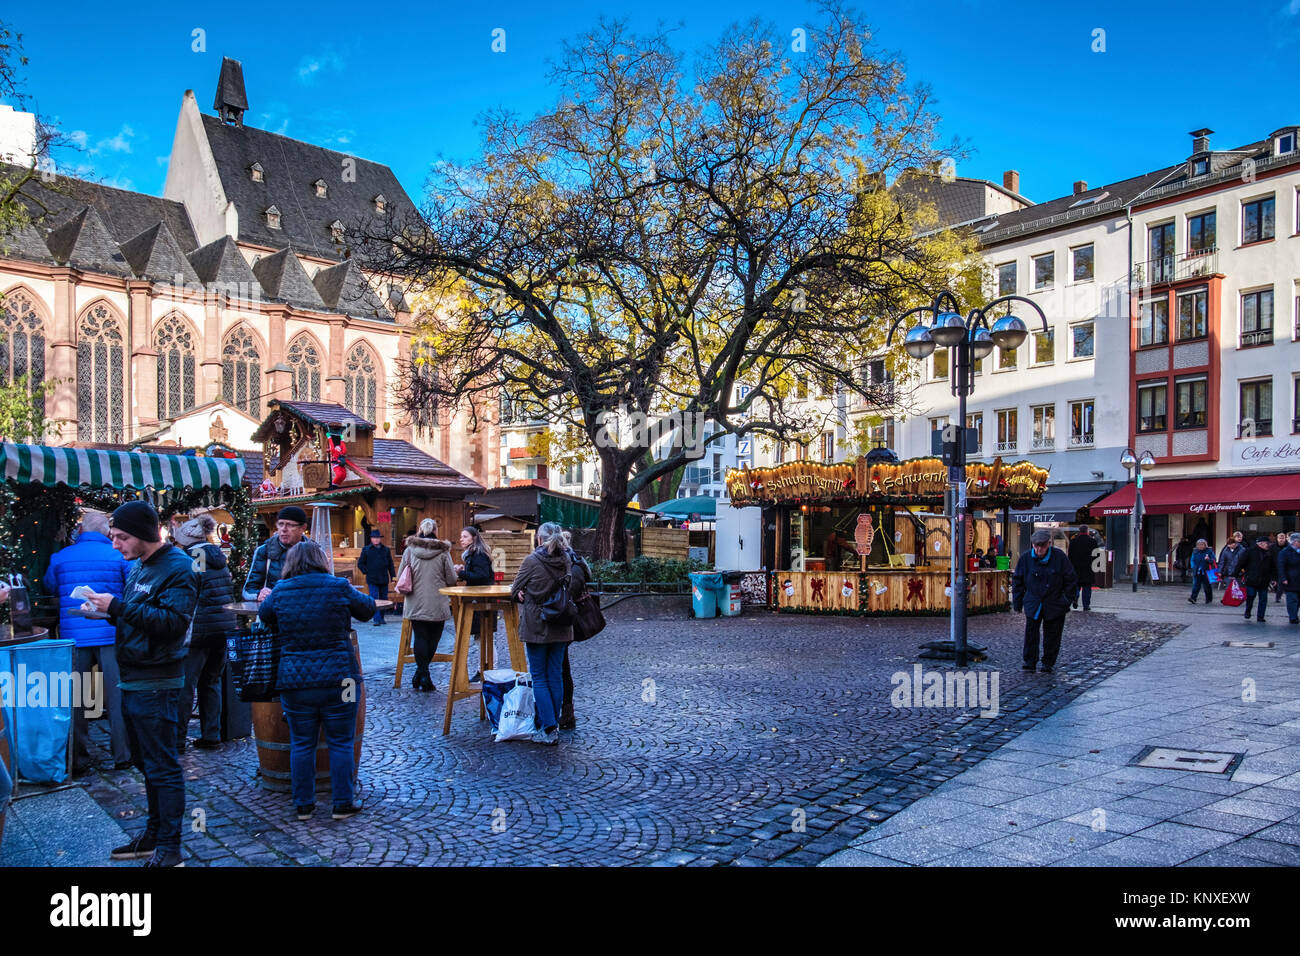 Frankfurt,Germany.Liebfrauenkirche,Our Dear Lady Gothic-style Catholic church and traditional German Christmas market stalls on historic square. Stock Photo